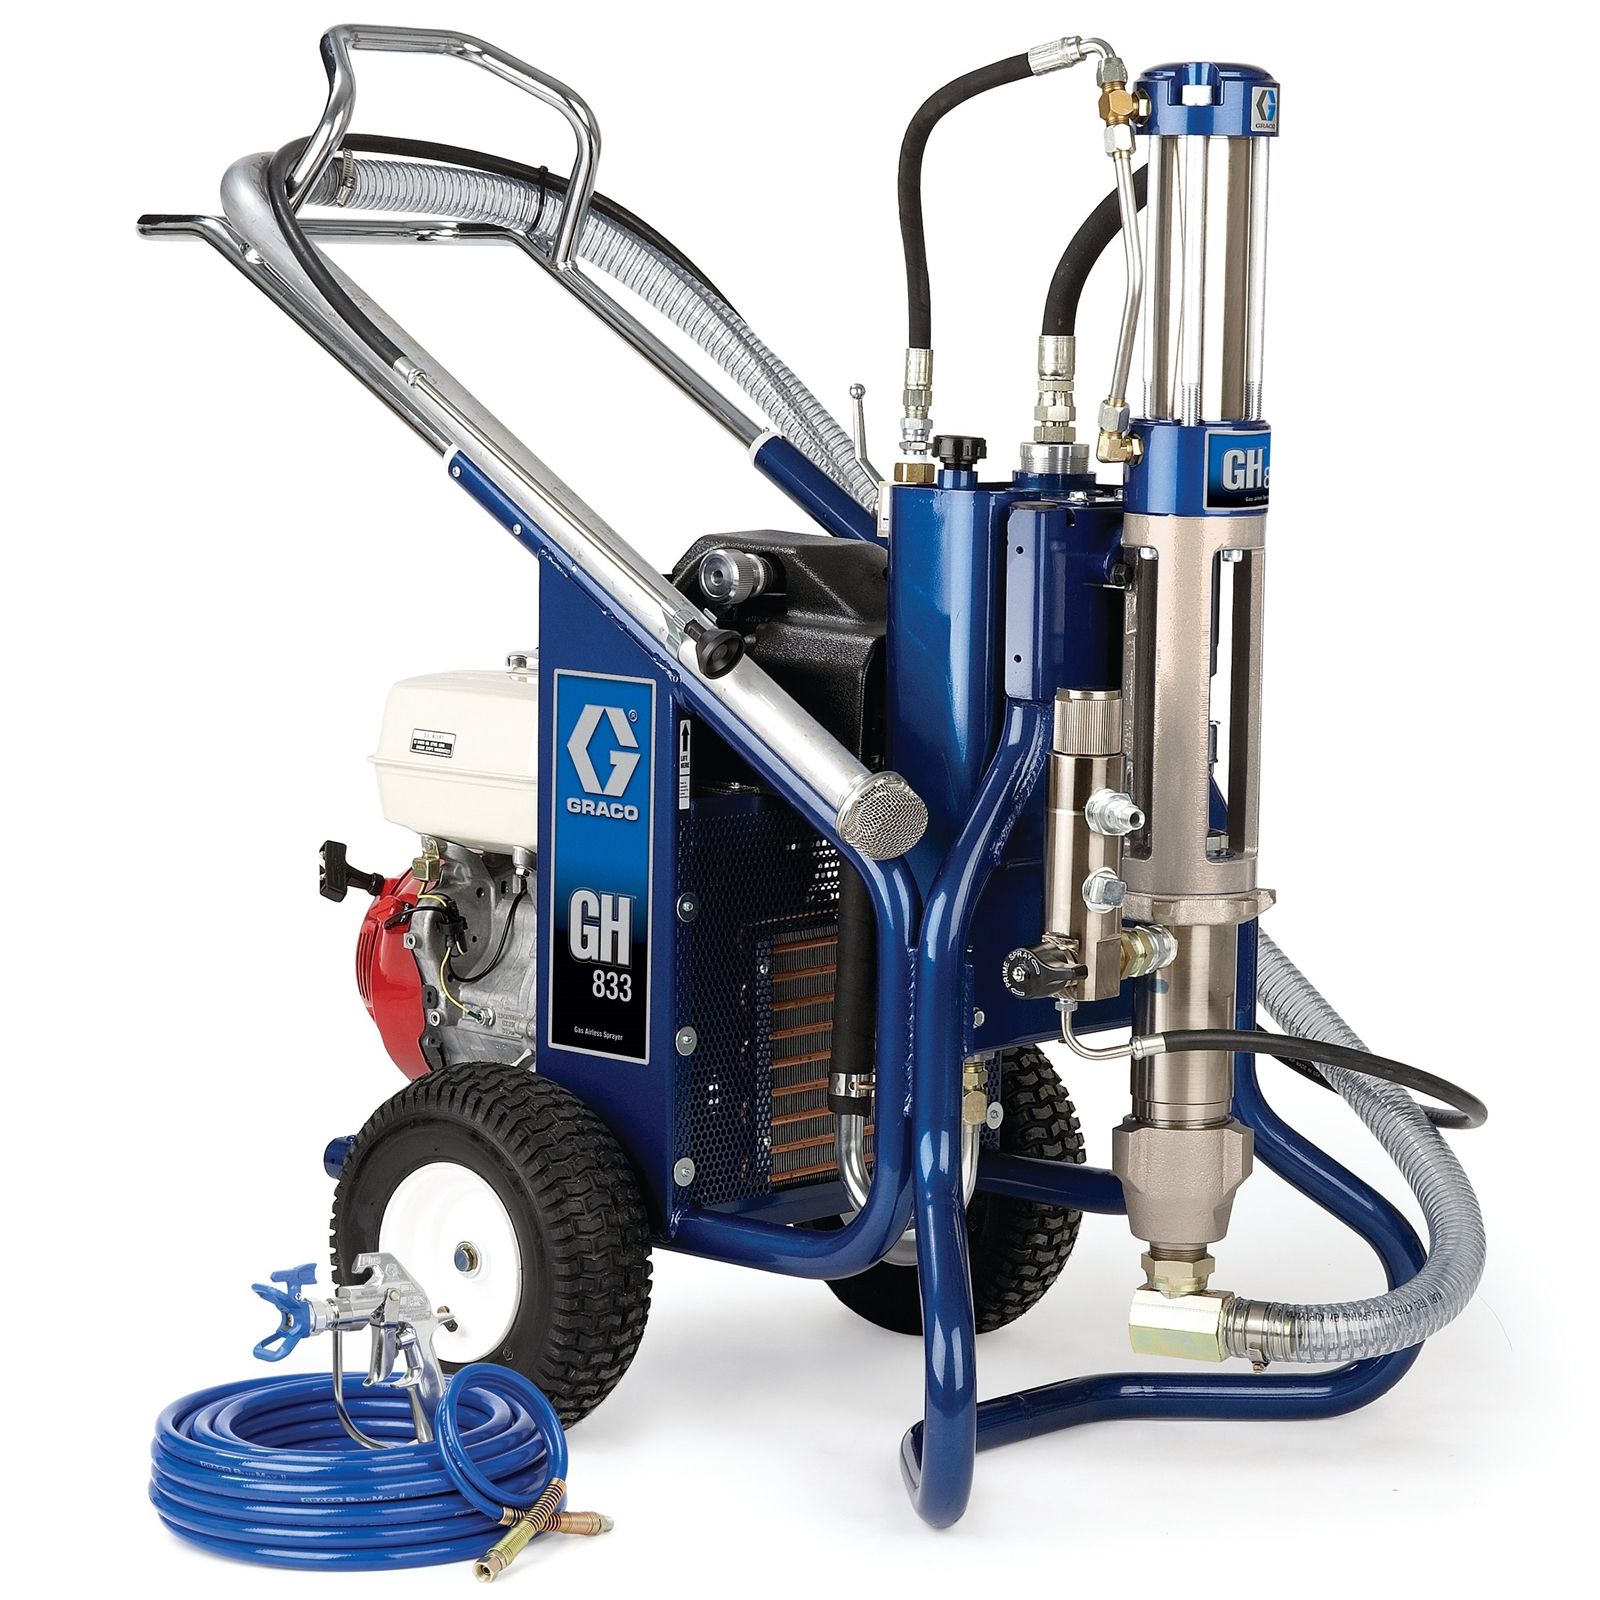 REDUCED** GRACO GH AIRLESS PAINT SPRAYER - general for sale - by owner -  craigslist